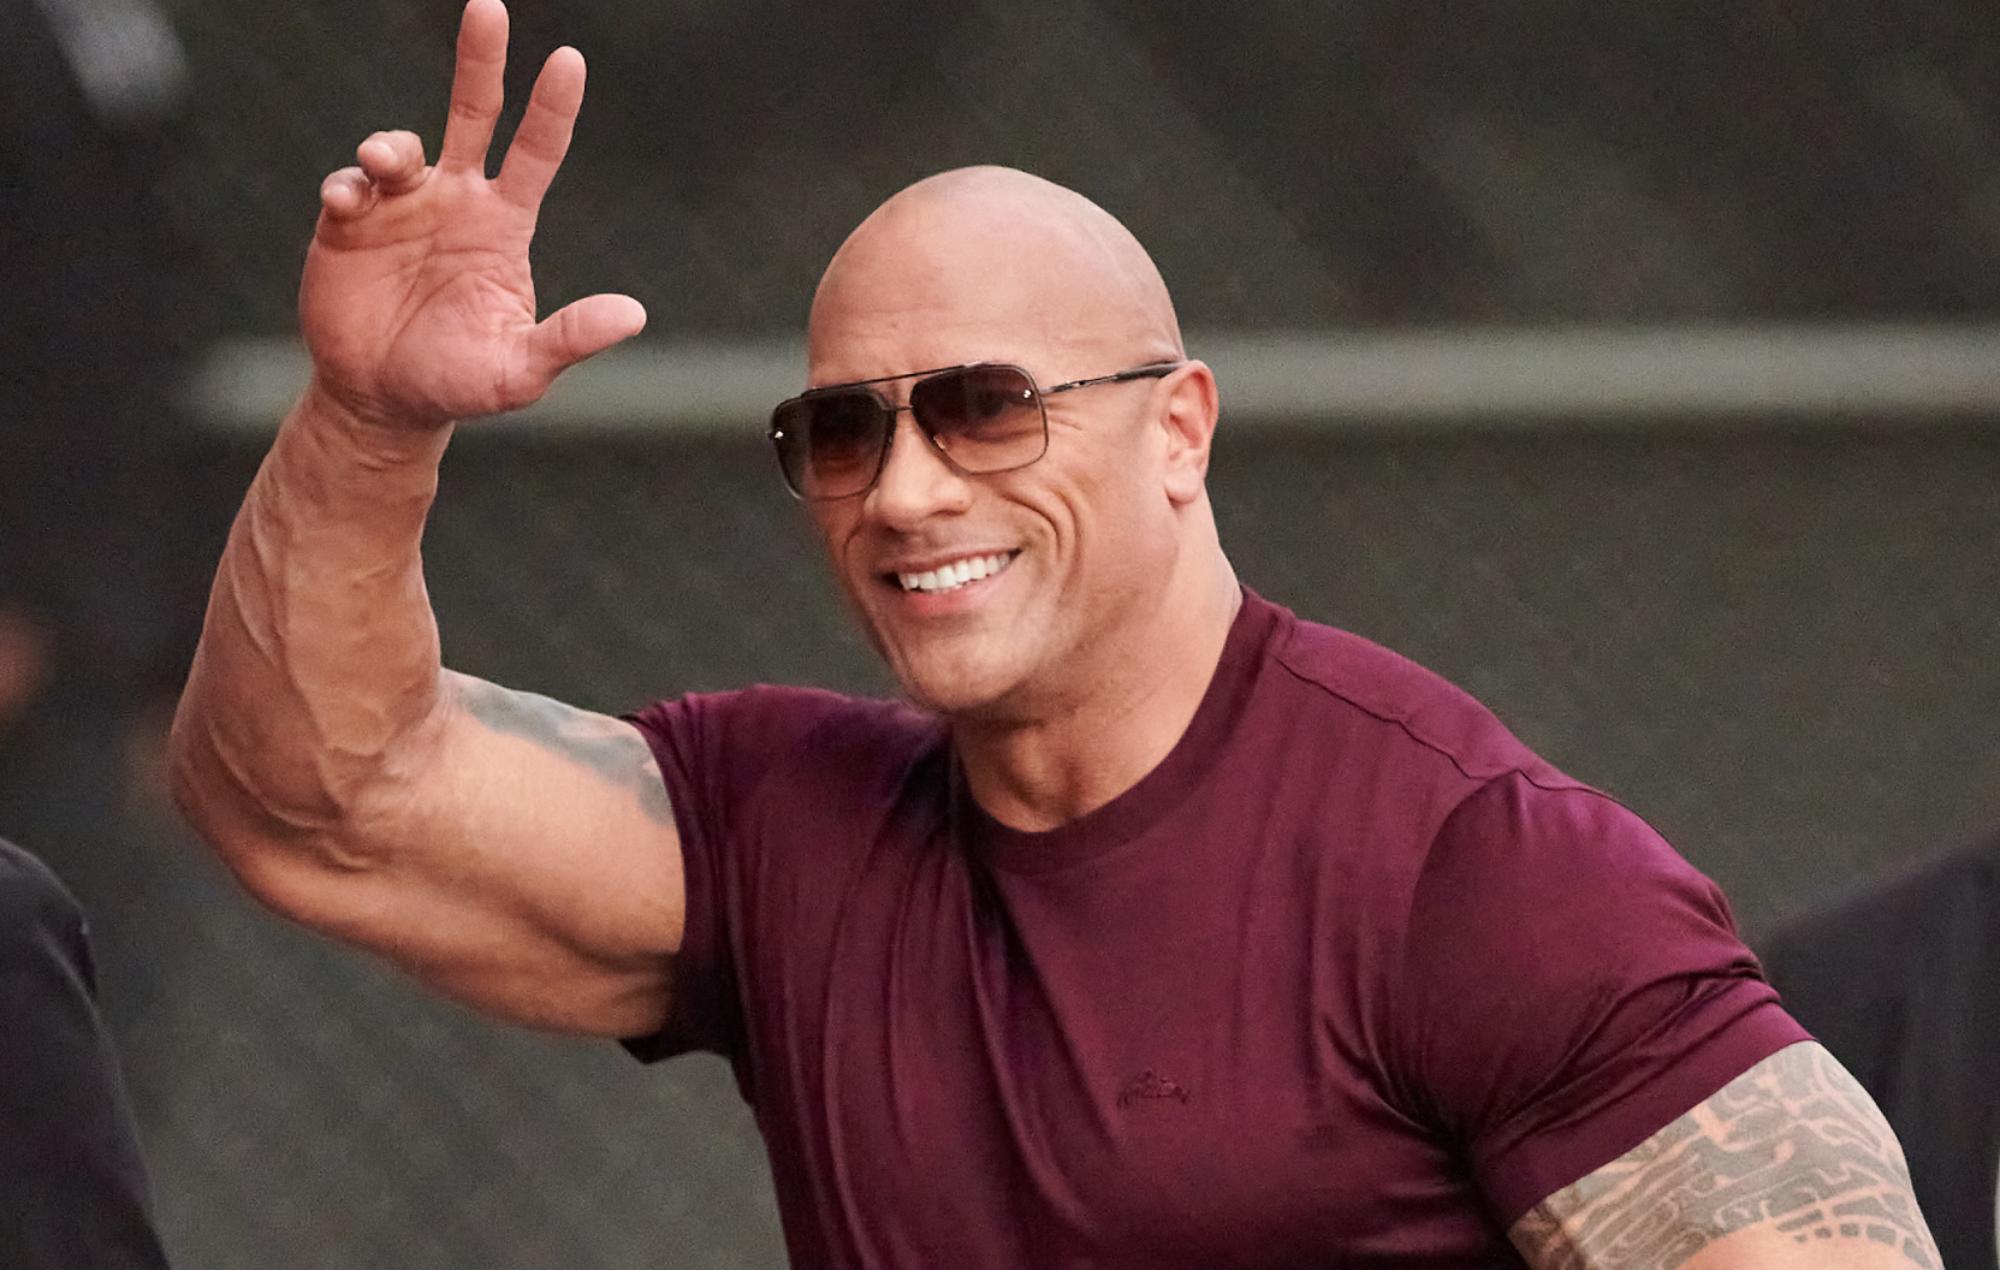 Dwayne Johnson new one of the biggest celebrities in the world